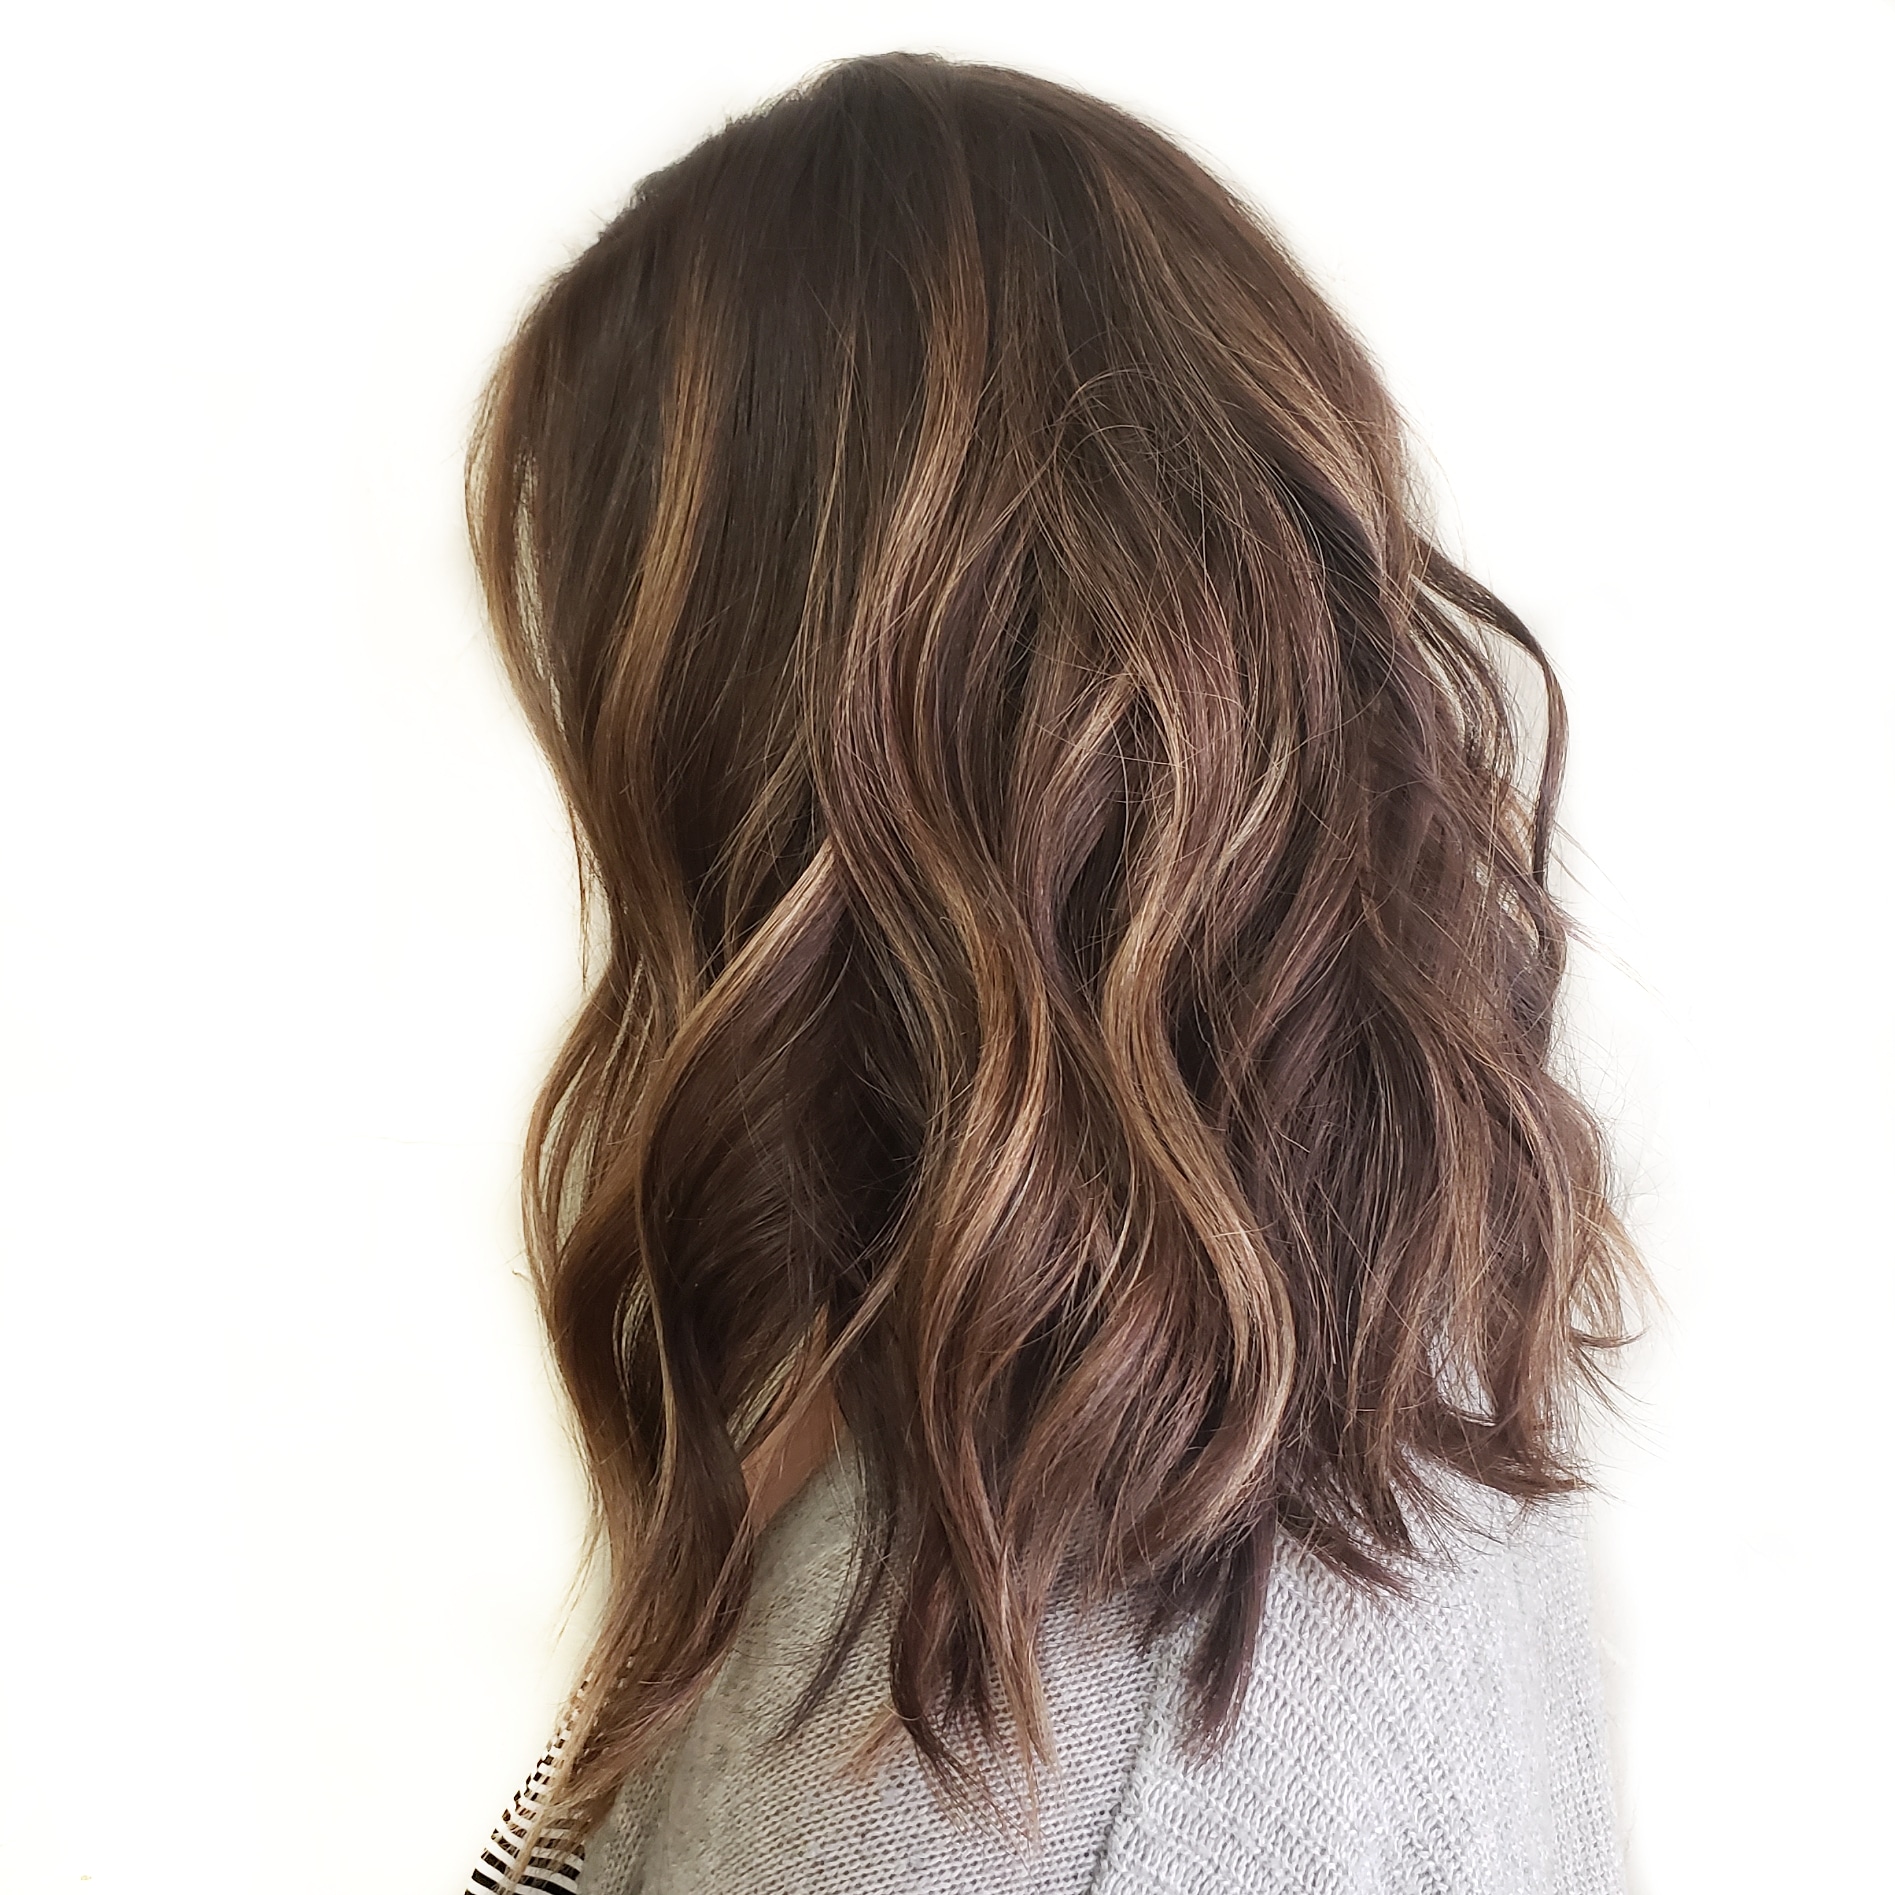 Accent Balayage/Foils And Blowdry